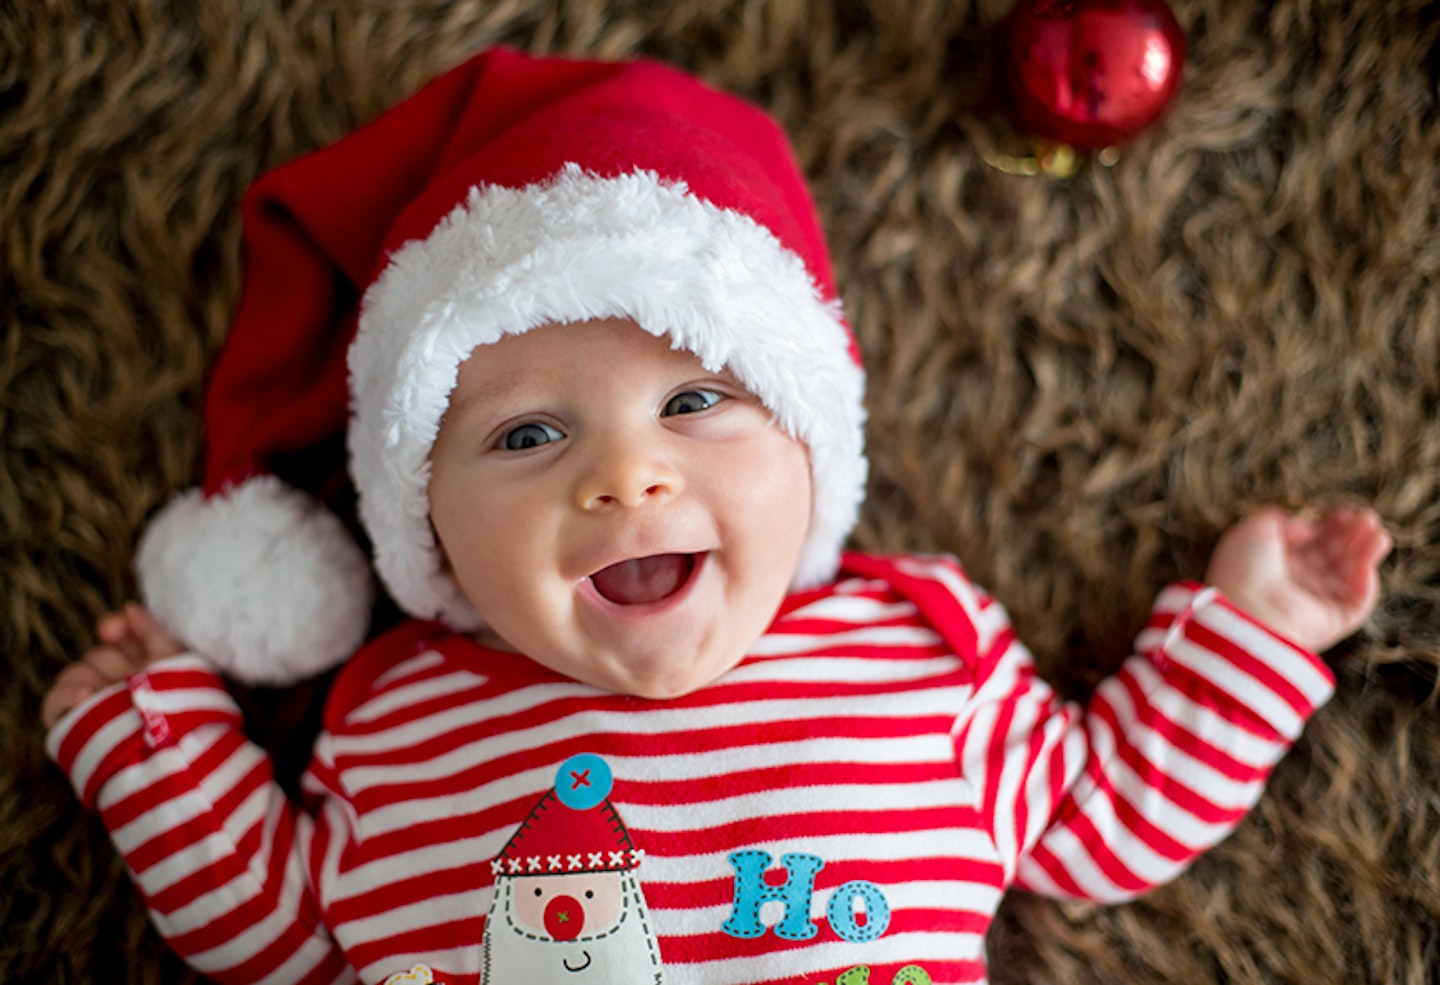 Baby wearing Christmas outfit